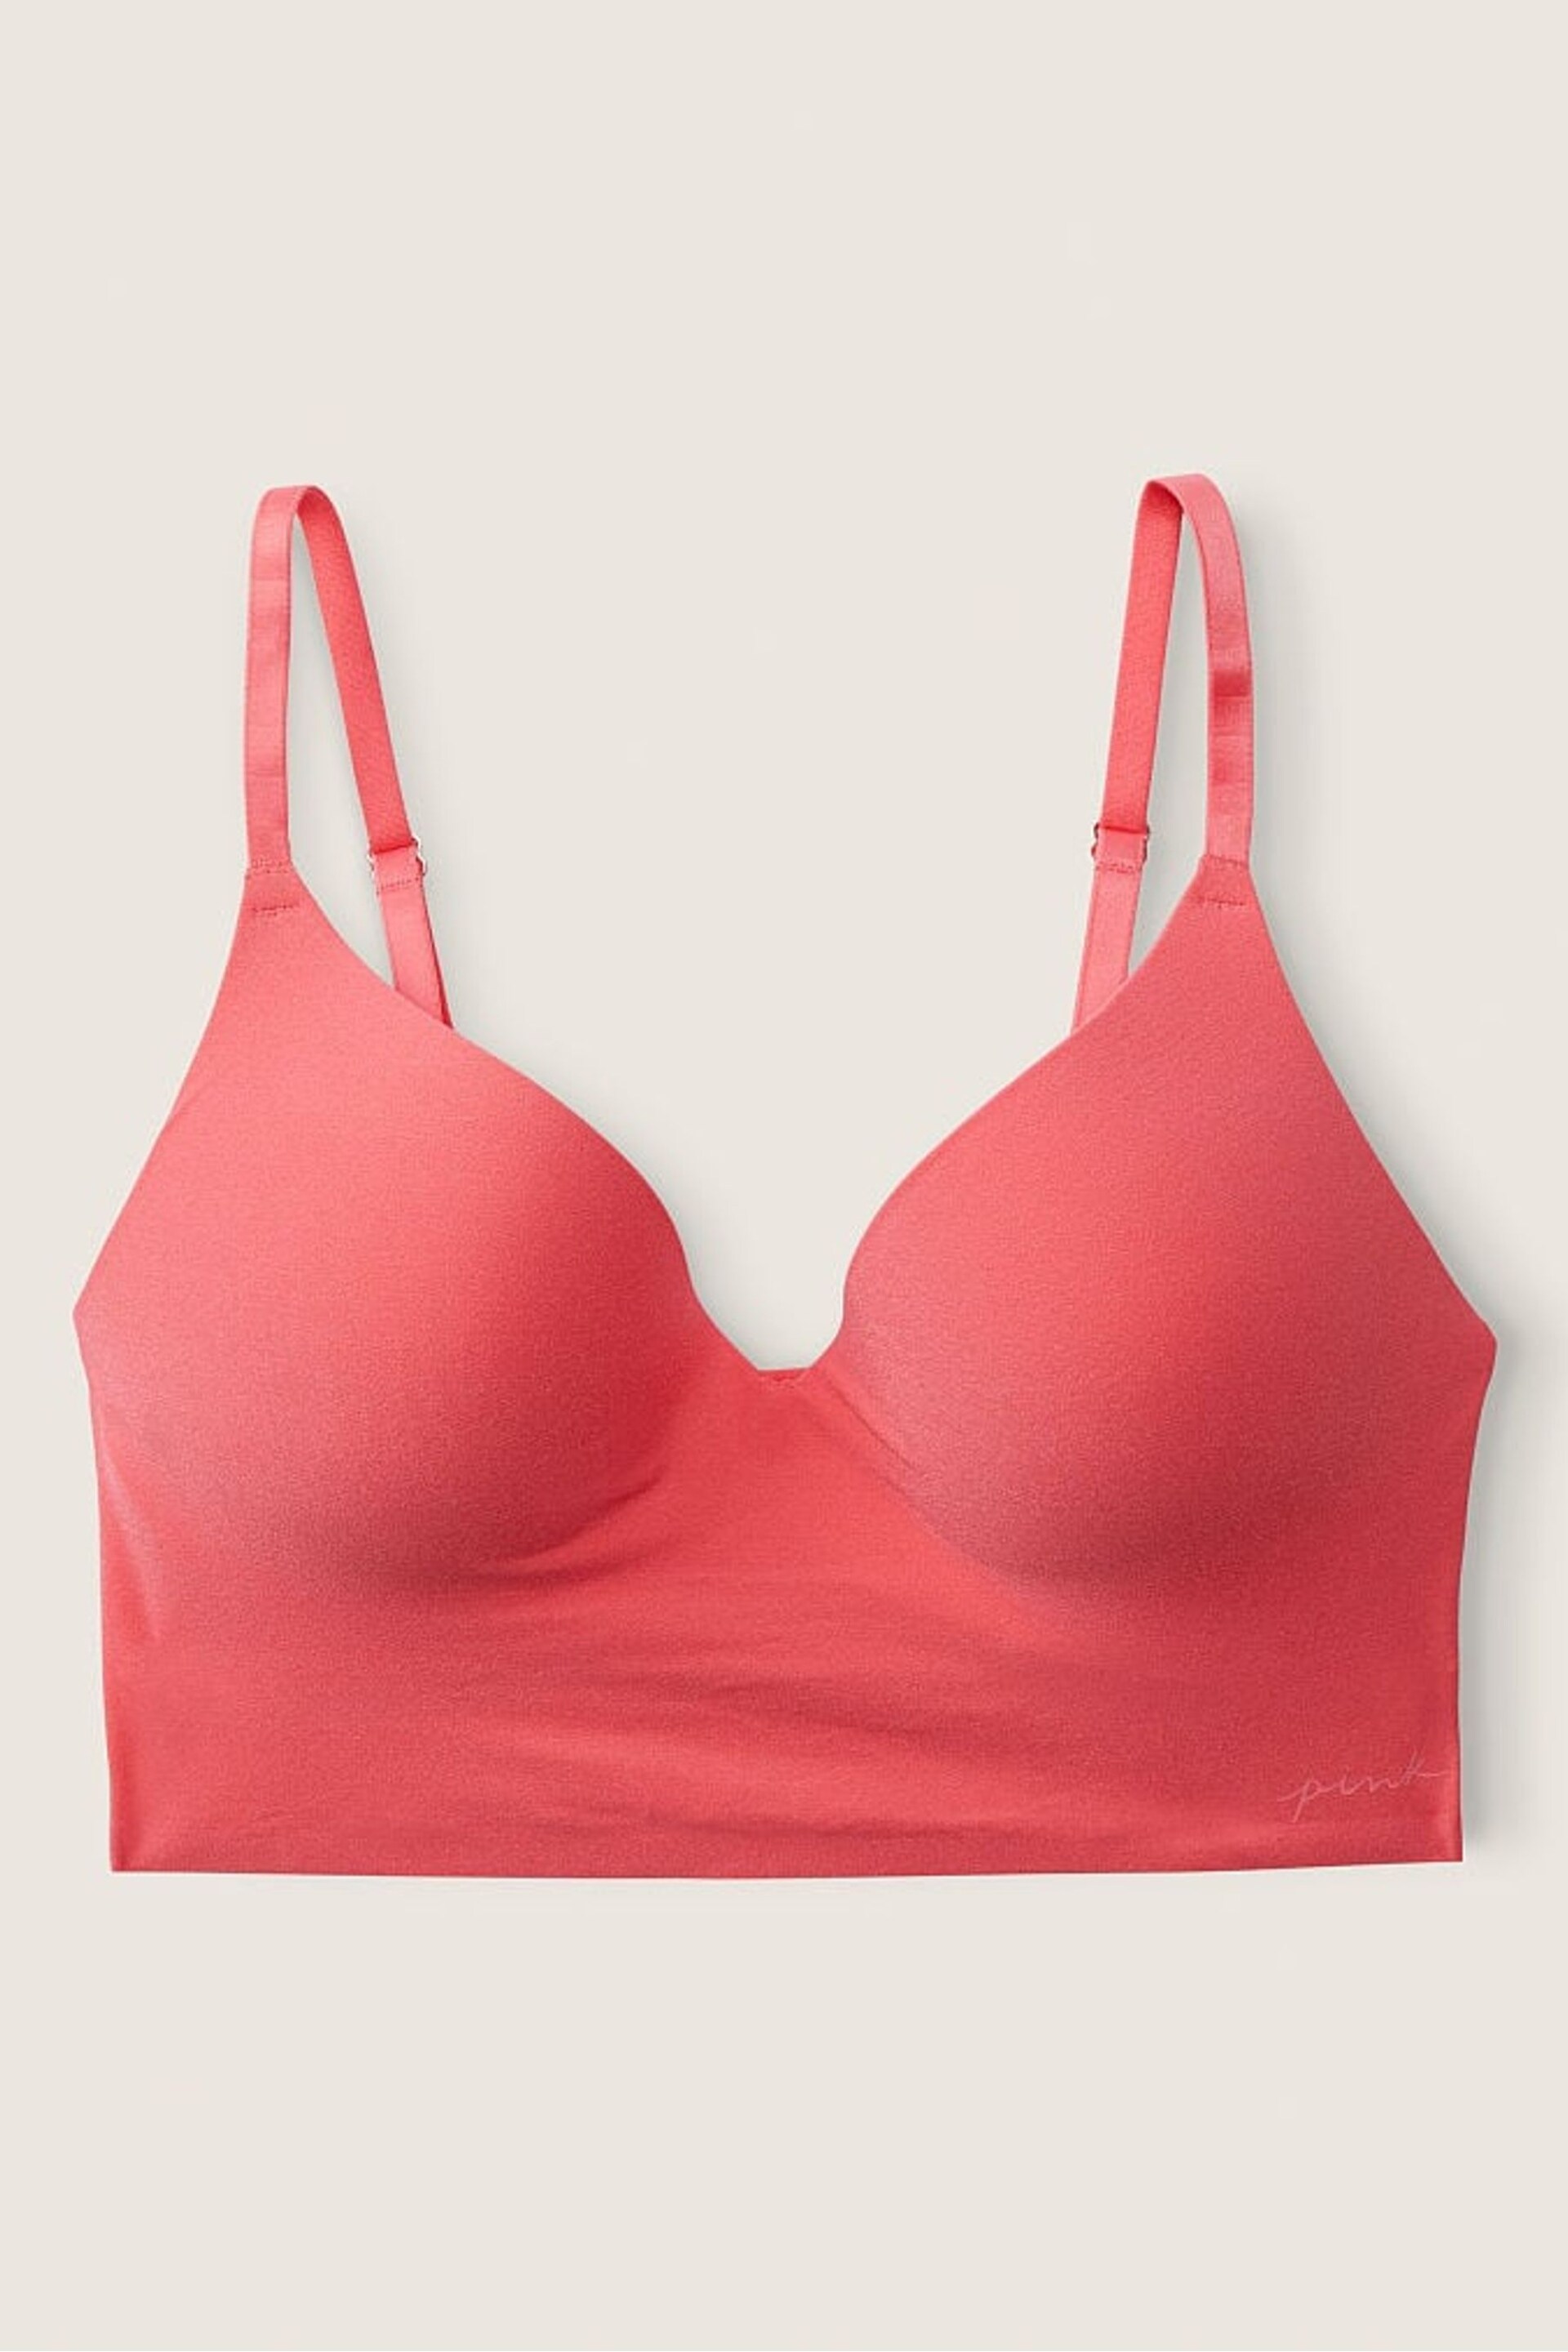 Victoria's Secret PINK Sunkissed Pink Smooth Non Wired Push Up Bralette - Image 4 of 4